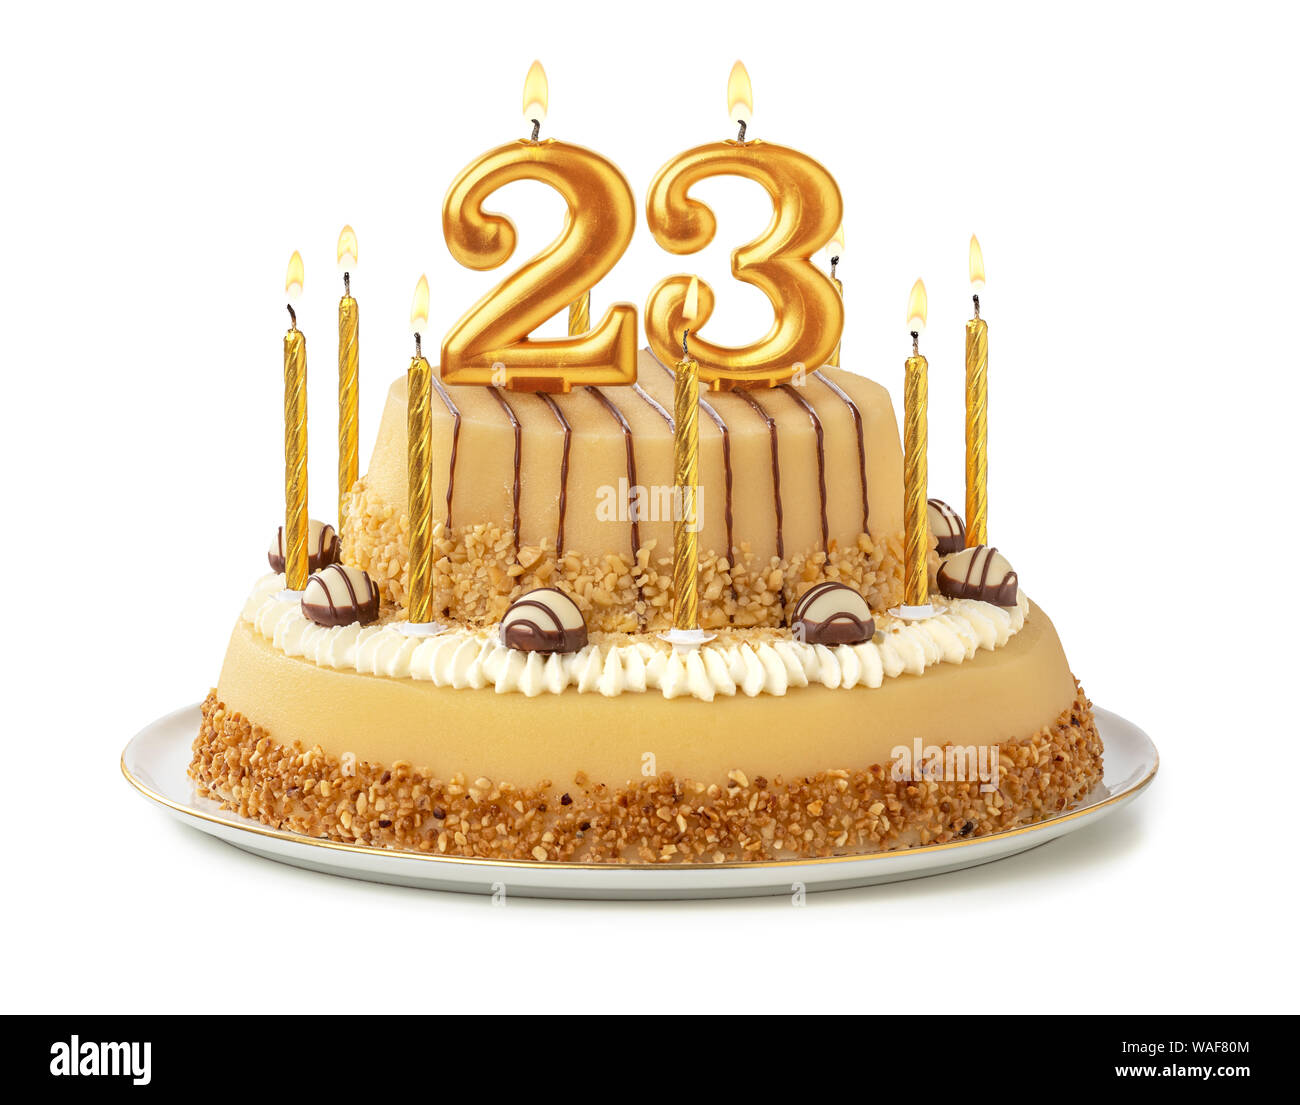 Festive Cake With Golden Candles Number 23 Stock Photo Alamy